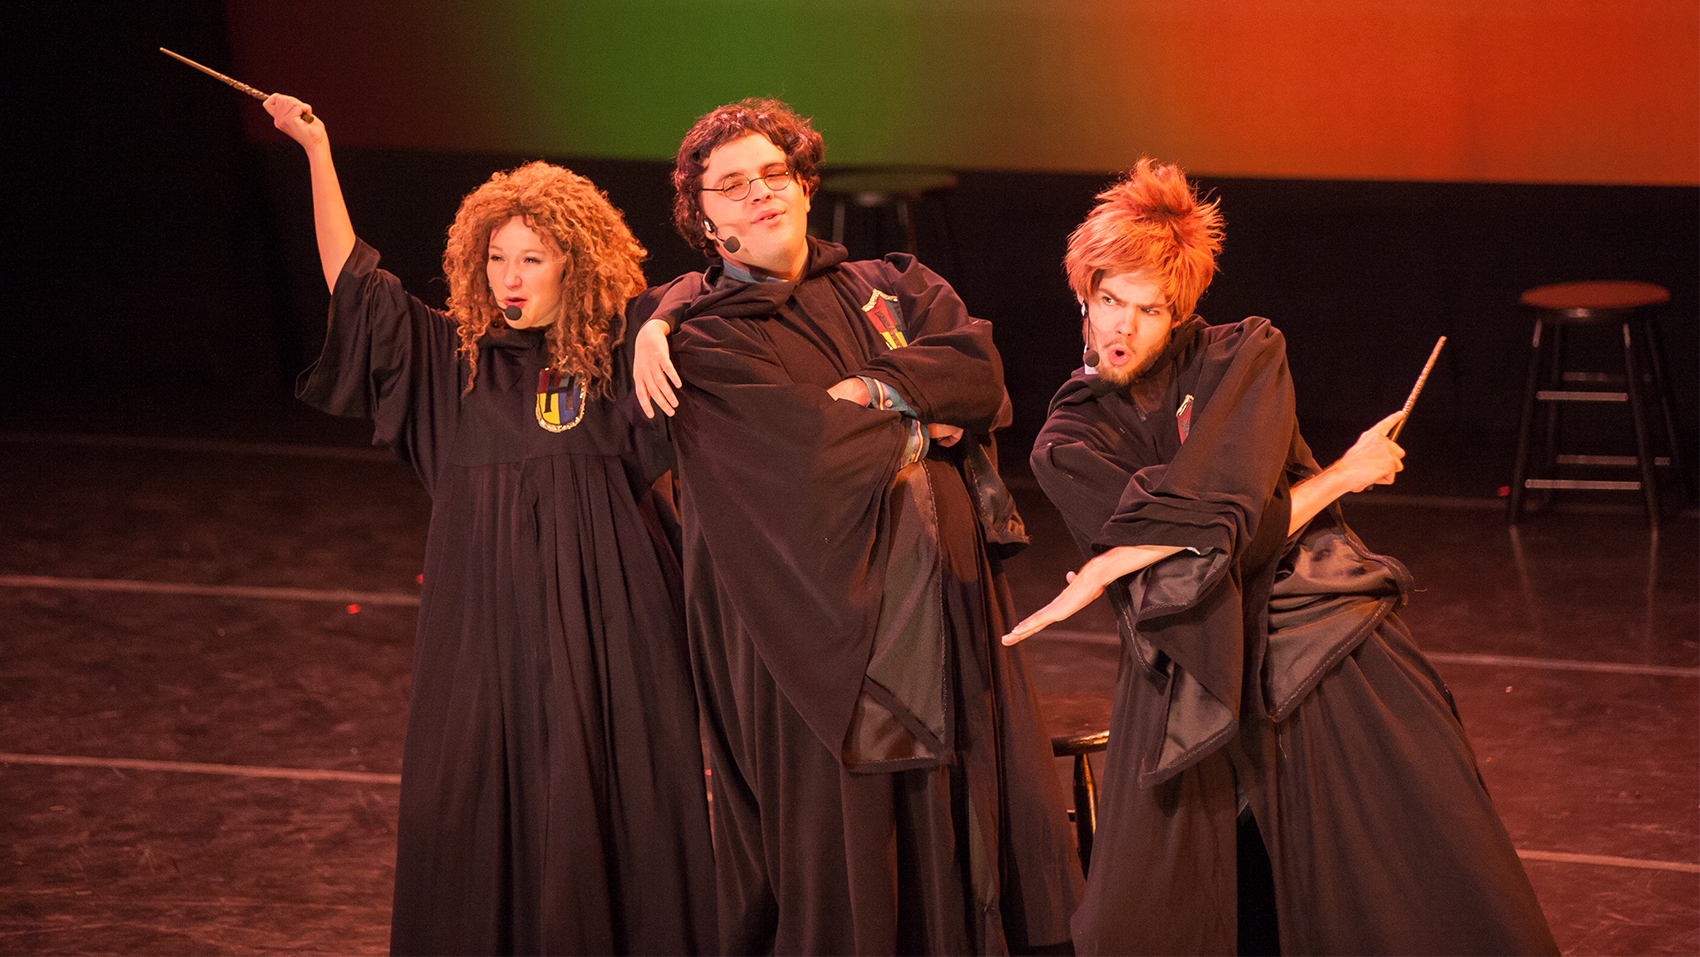 Three actors dressed as characters from the Harry Potter series stand together and sing. On the far left, the actress holds up a wand and has her arm against the shoulder of the central actor, who leans against her. The right actor has his arms crossed in an ‘X’, wand in one hand.  